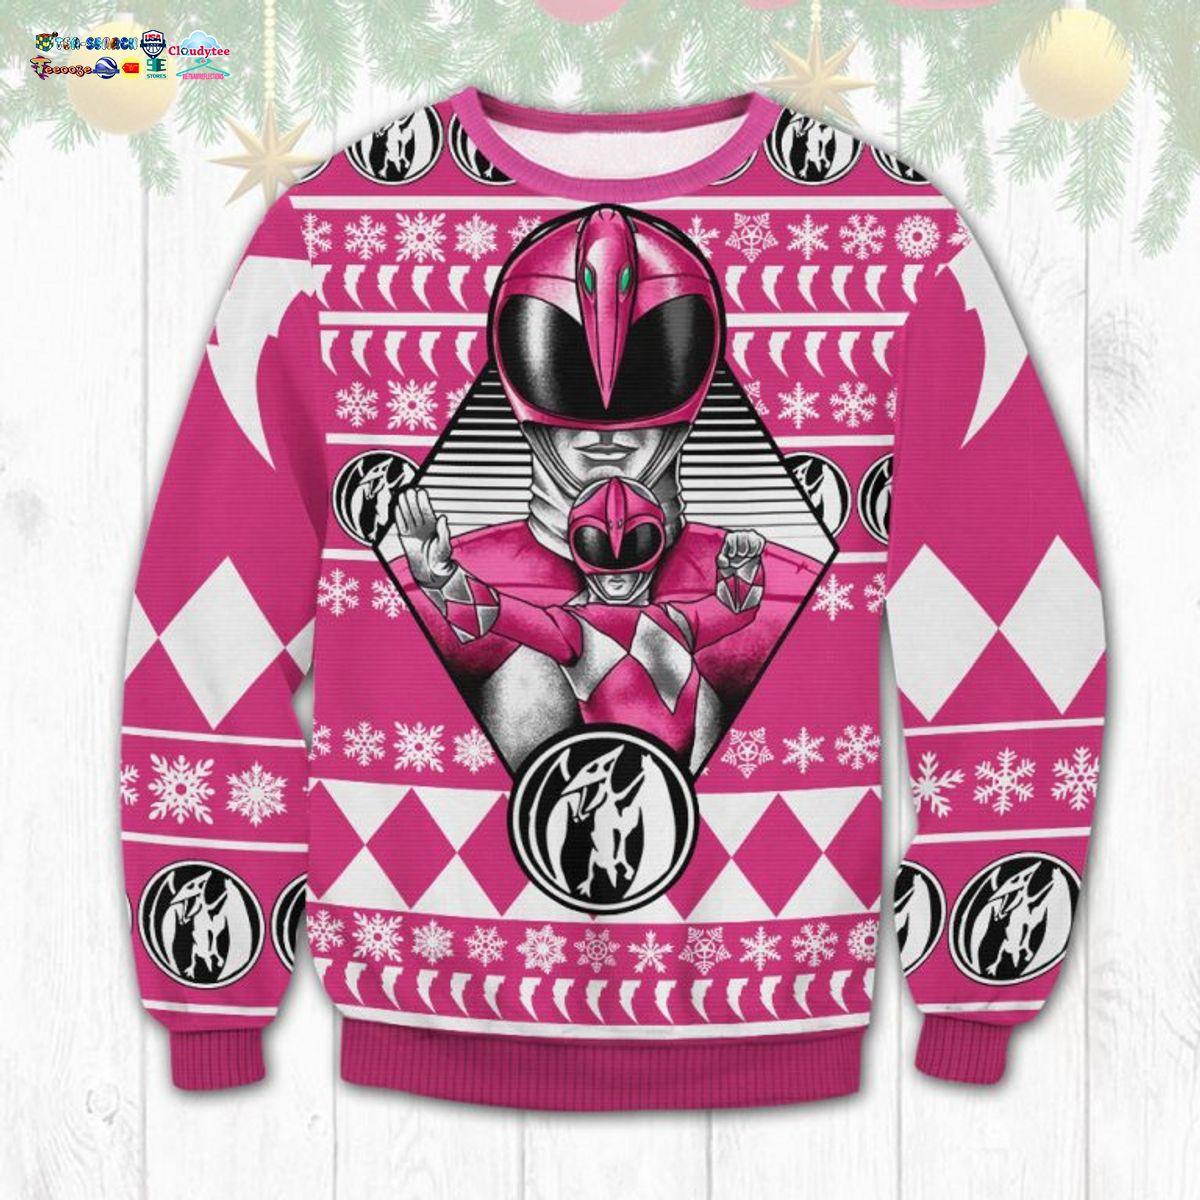 Pink Power Rangers Ugly Christmas Sweater - You look cheerful dear